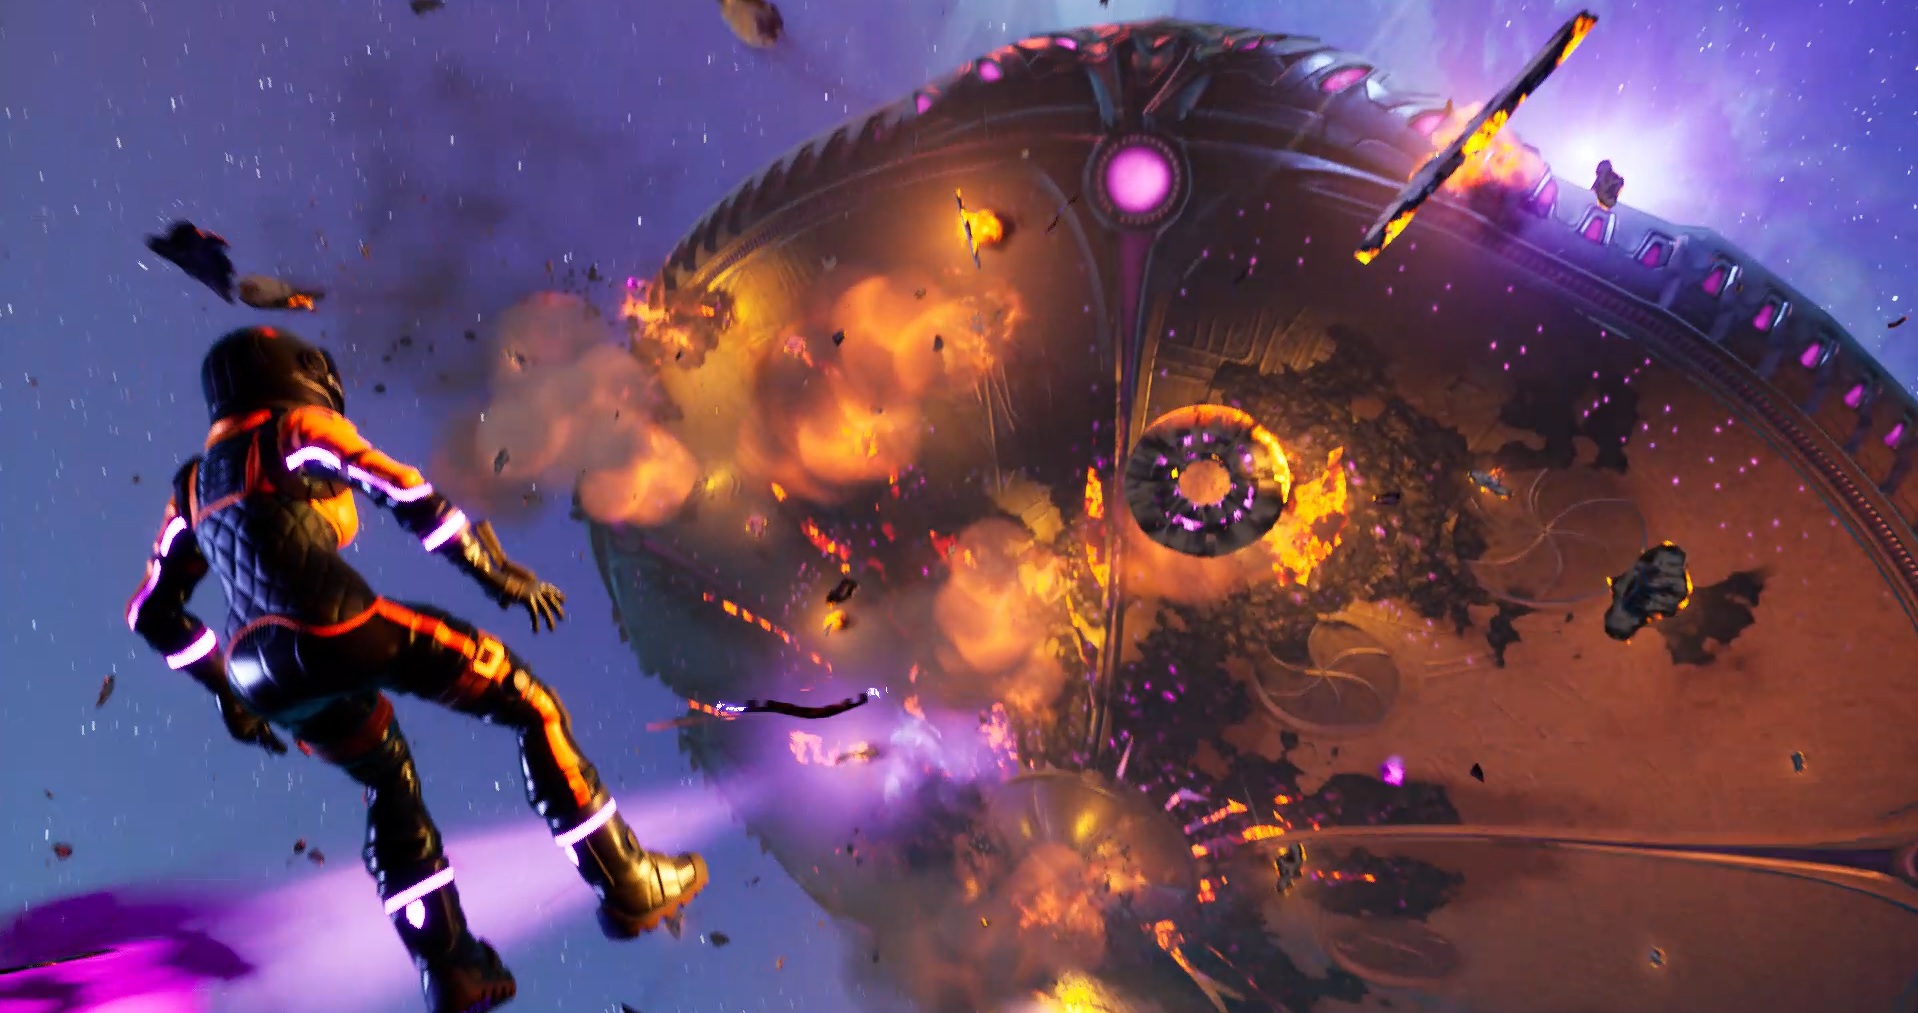 Fortnite S Operation Sky Fire Event Just Crashed A Massive Ufo Mothership To End Chapter 2 Season 7 Space